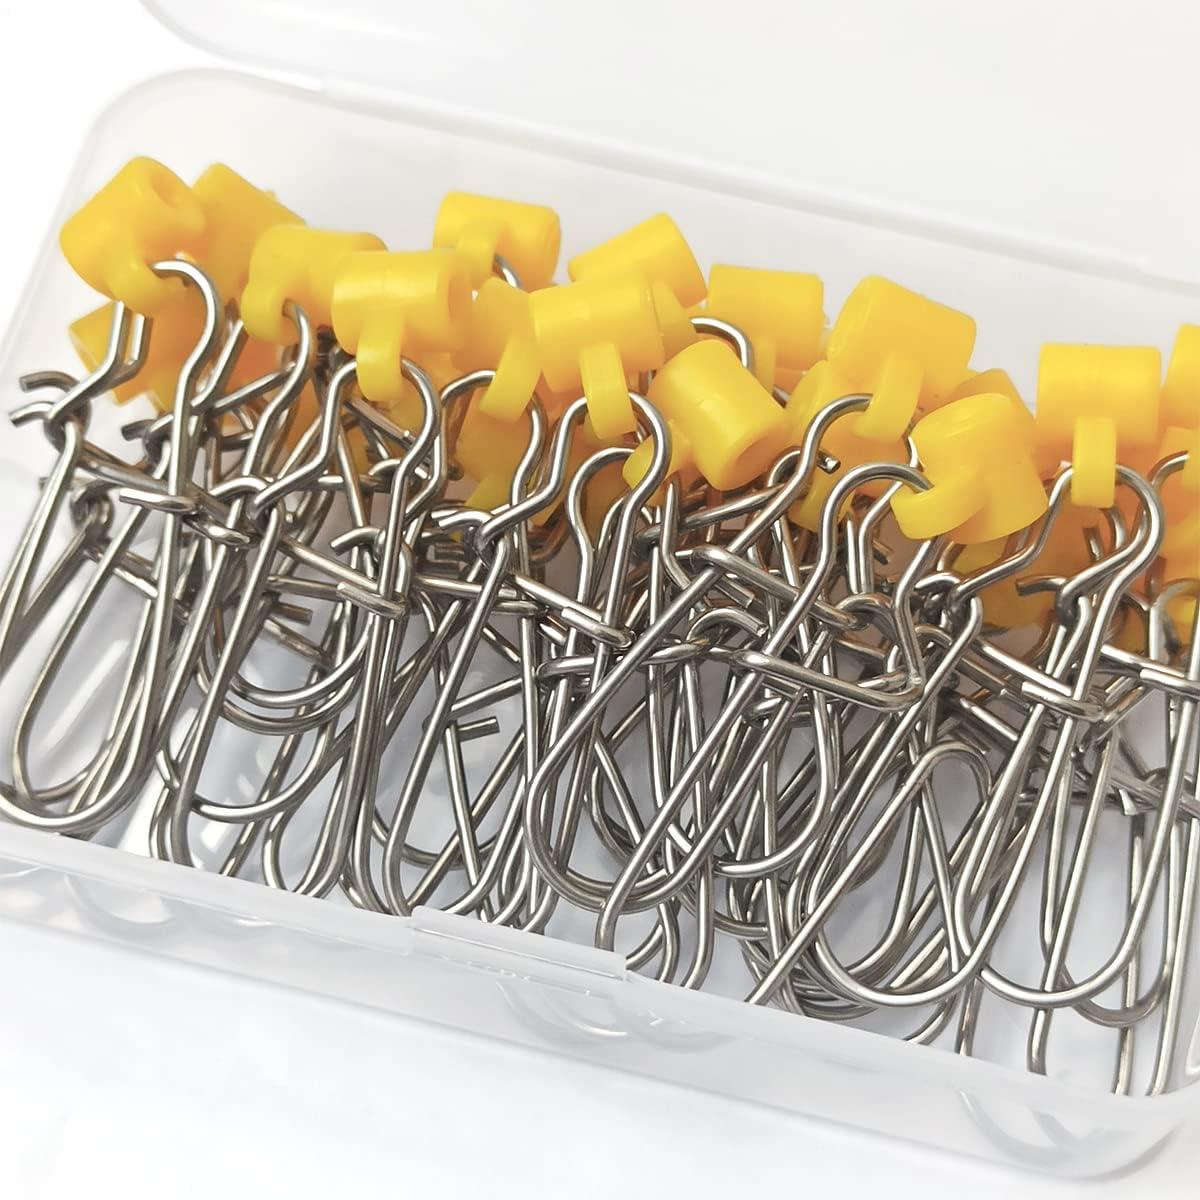 South Bend 45 Piece Saltwater Kit - Hooks, Rigs, Sinkers, Snap